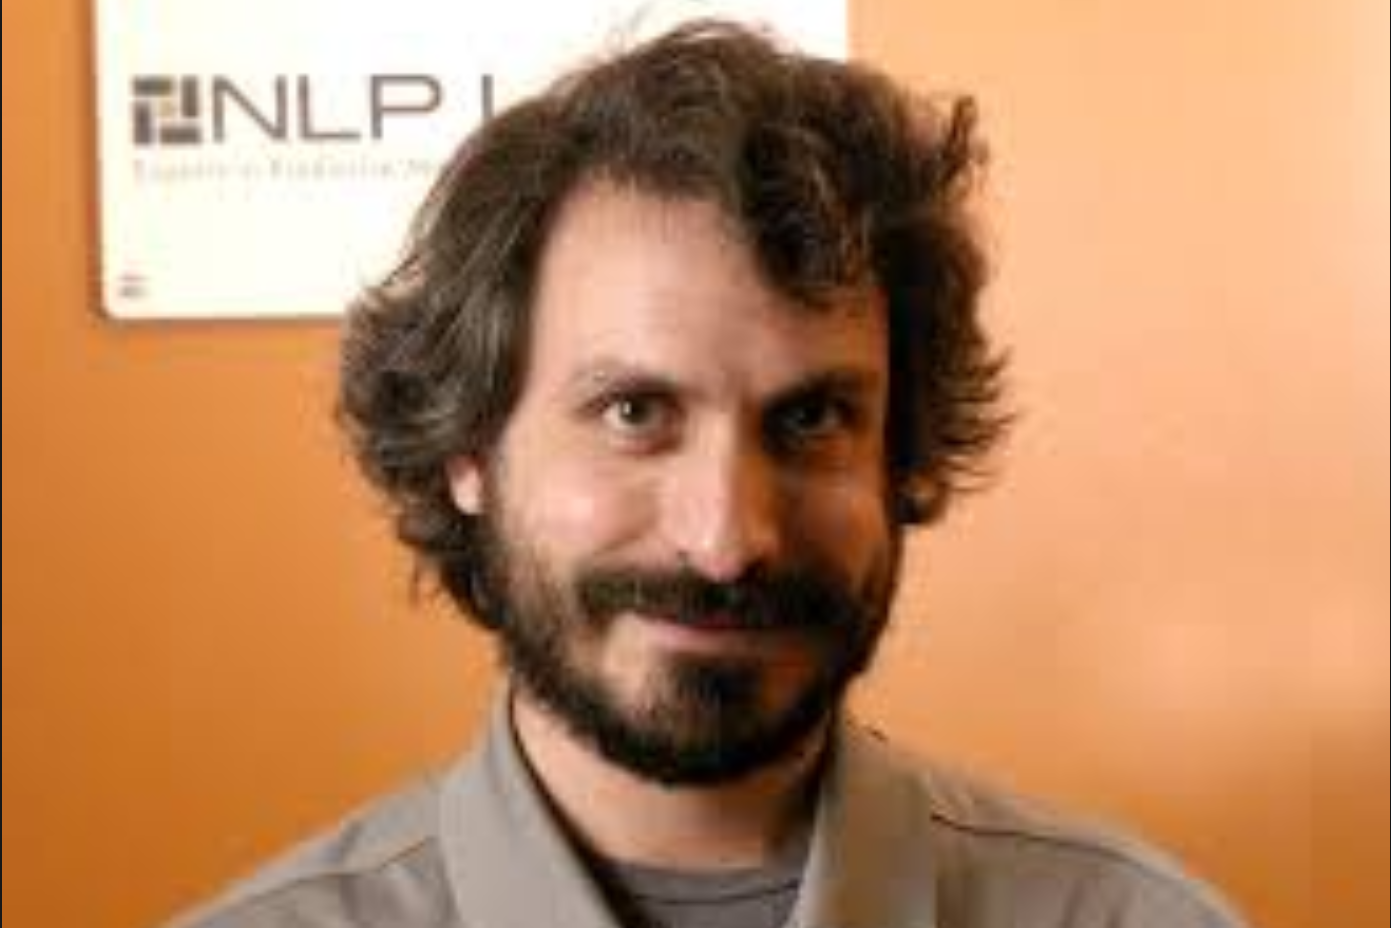 NLP Logix Congratulates Ben Webster for his Research Publication in the Journal of Basic and Applied Research International